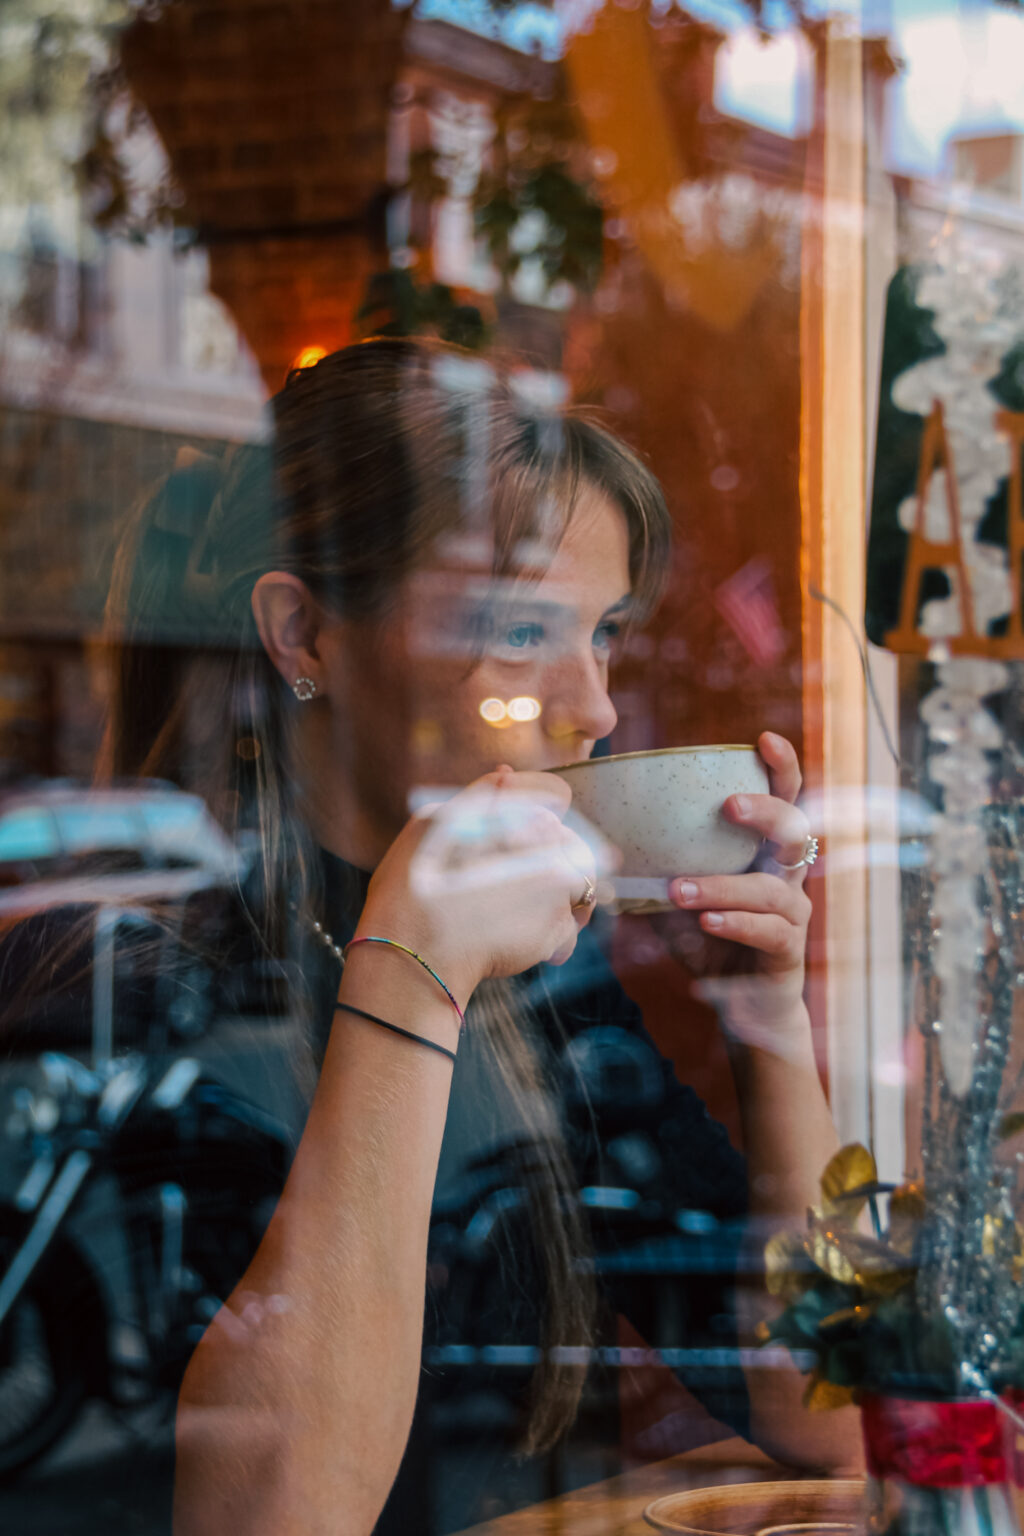 A women drinking a cup of coffee through a glass window